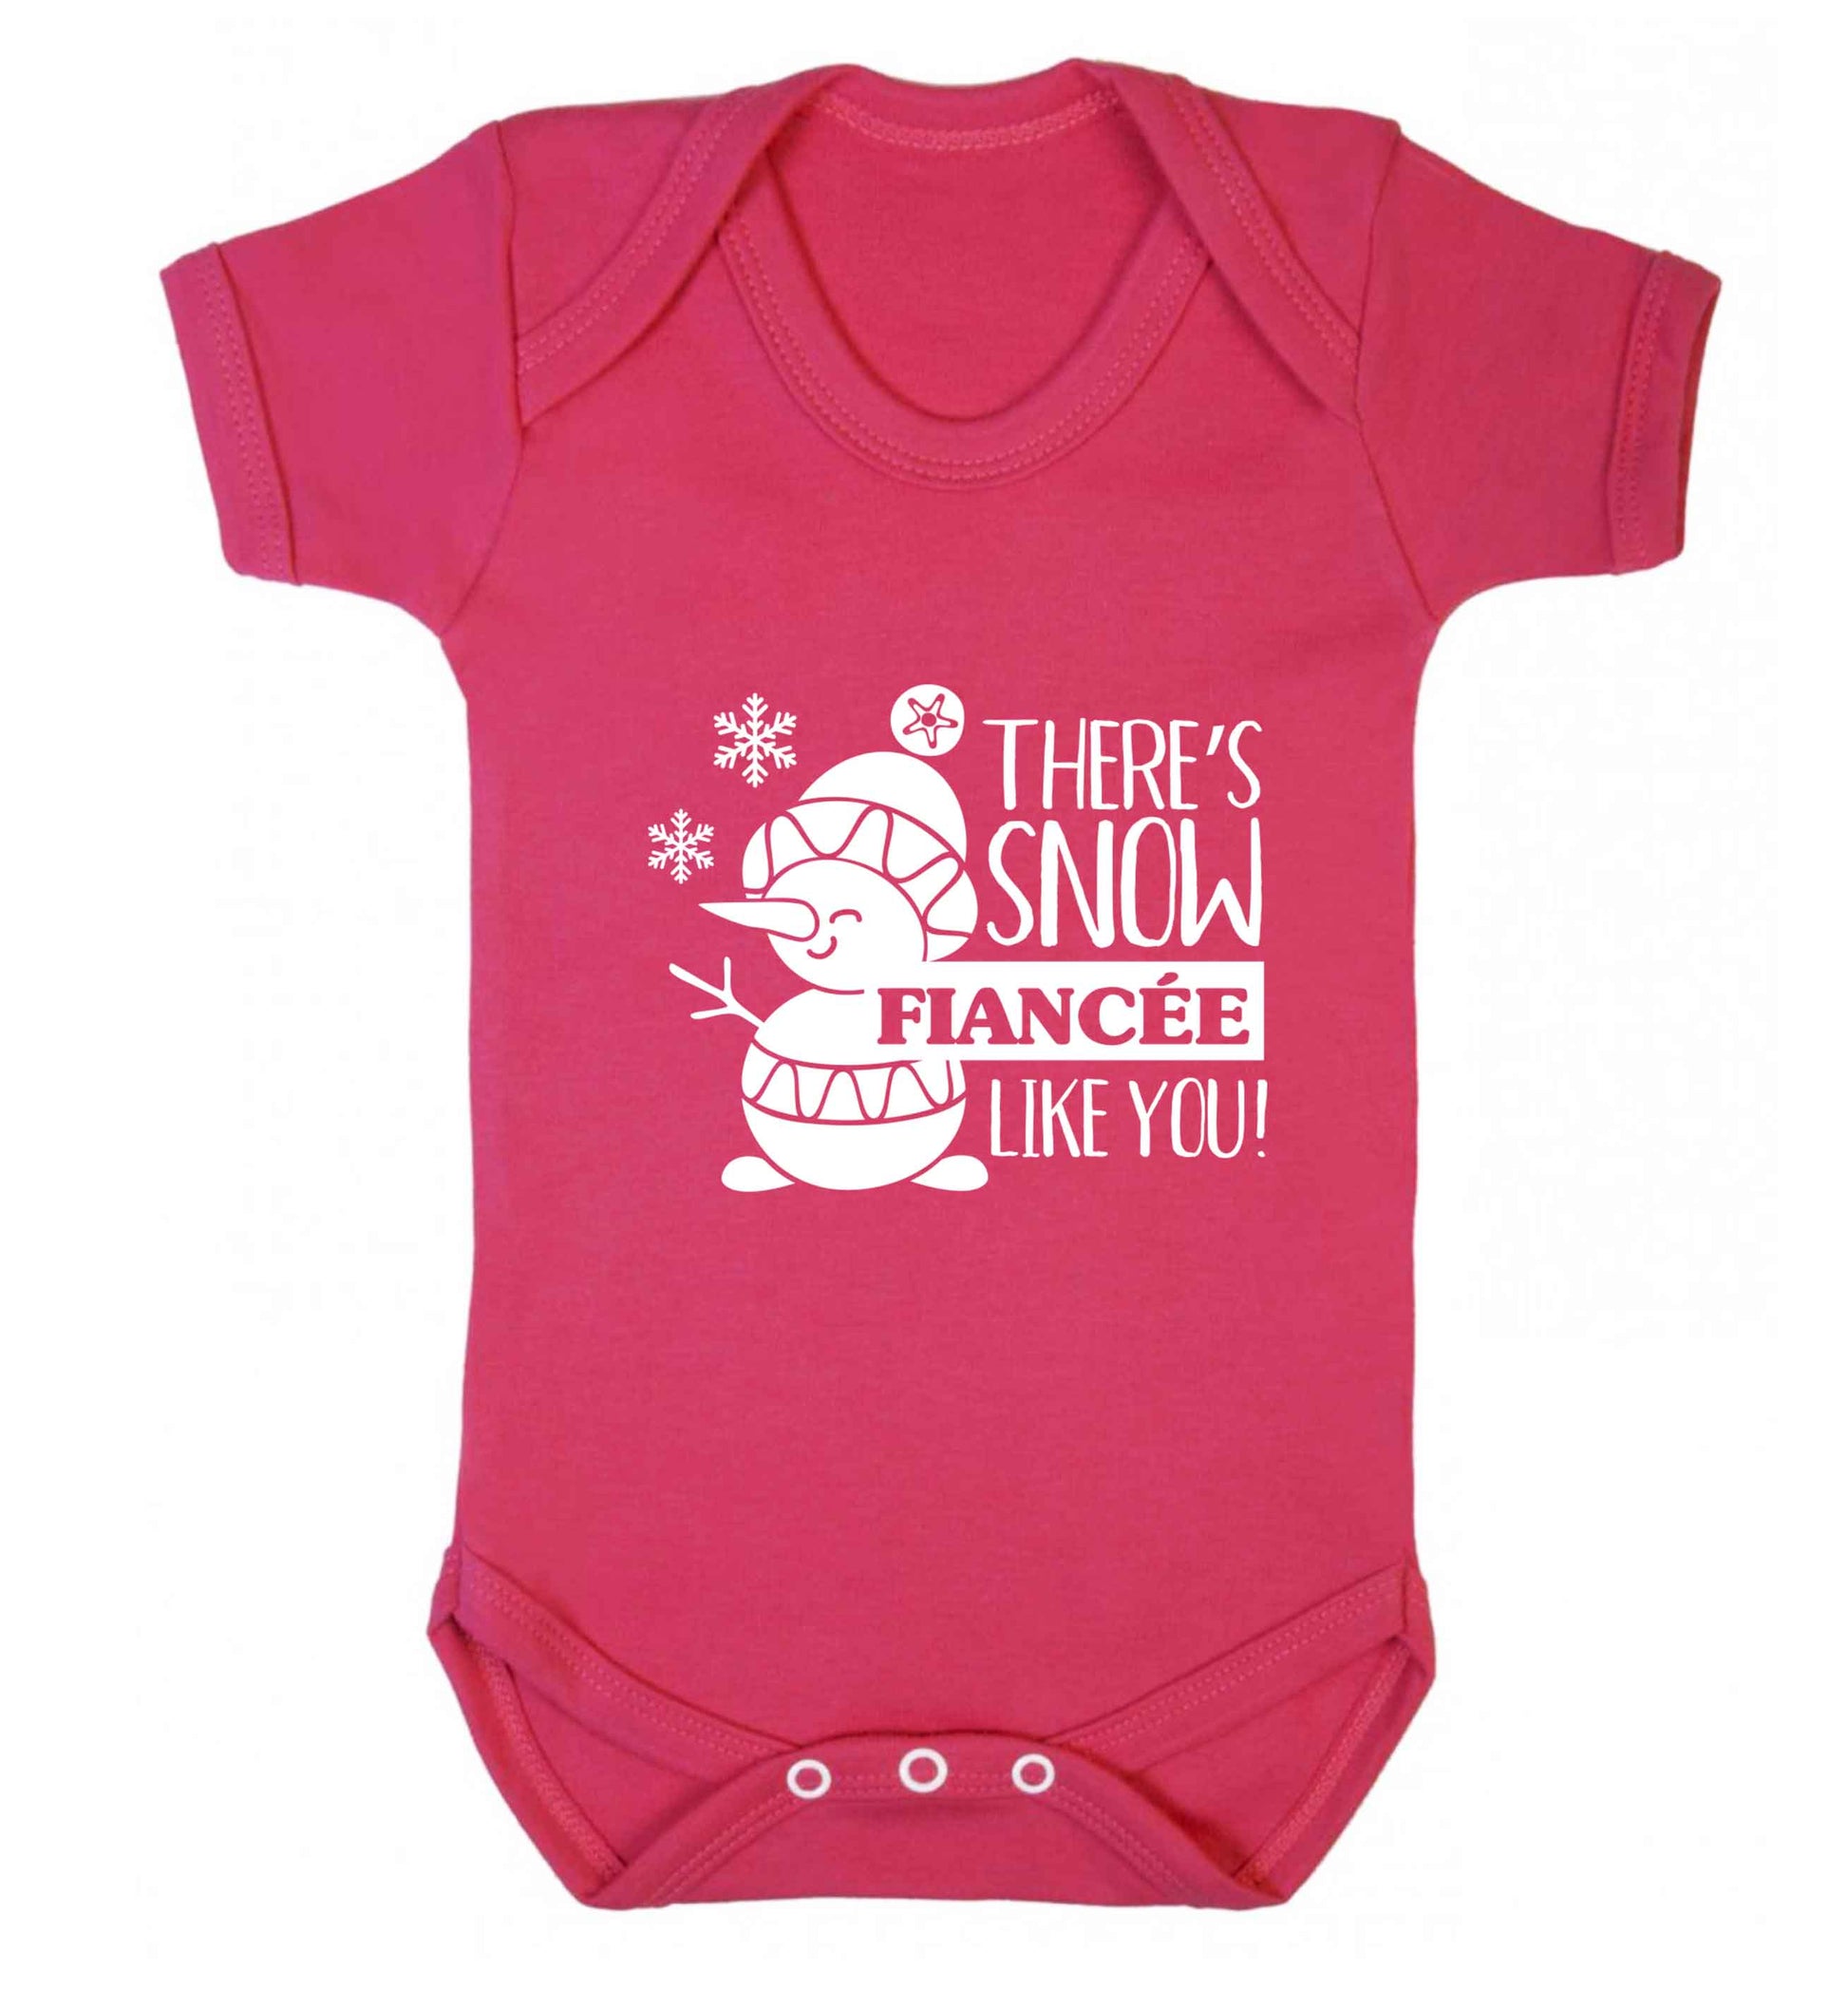 There's snow fiancee like you baby vest dark pink 18-24 months